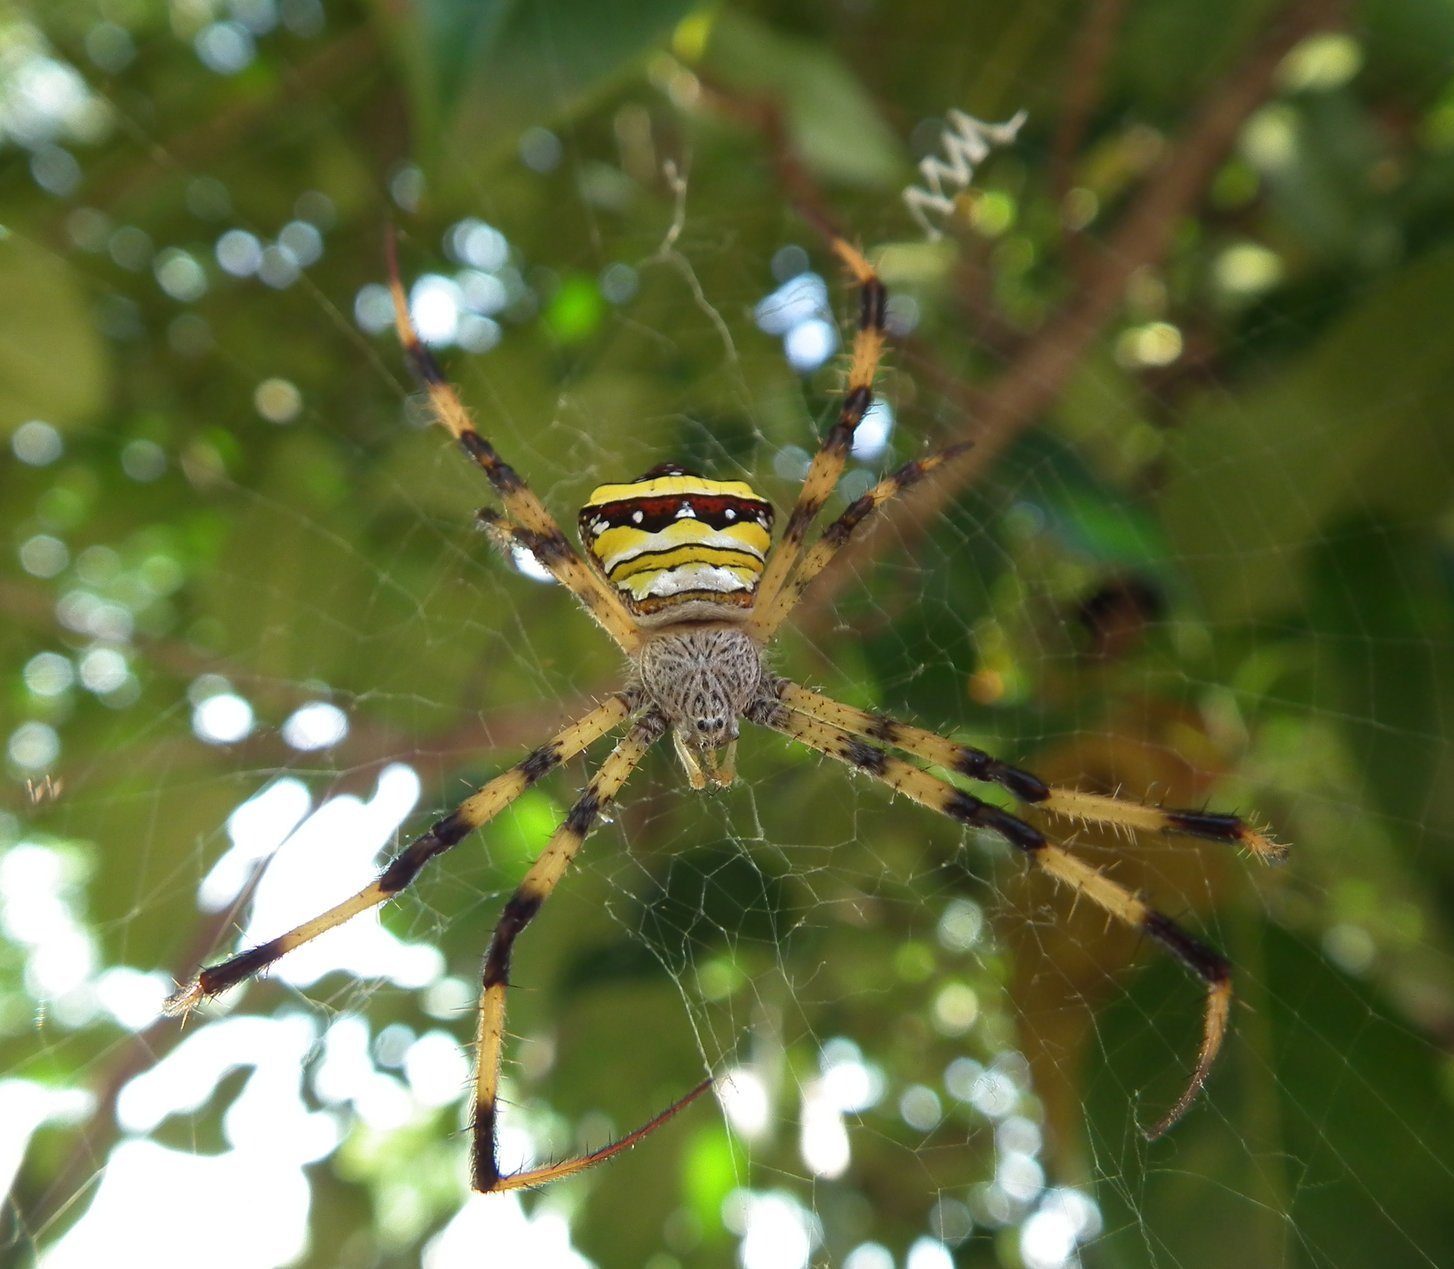 Argiope Spider - Insects, Arachnids, Reptiles & Amphibians, Spider | Insect | Yellow | Black | White | Thailand | Tree